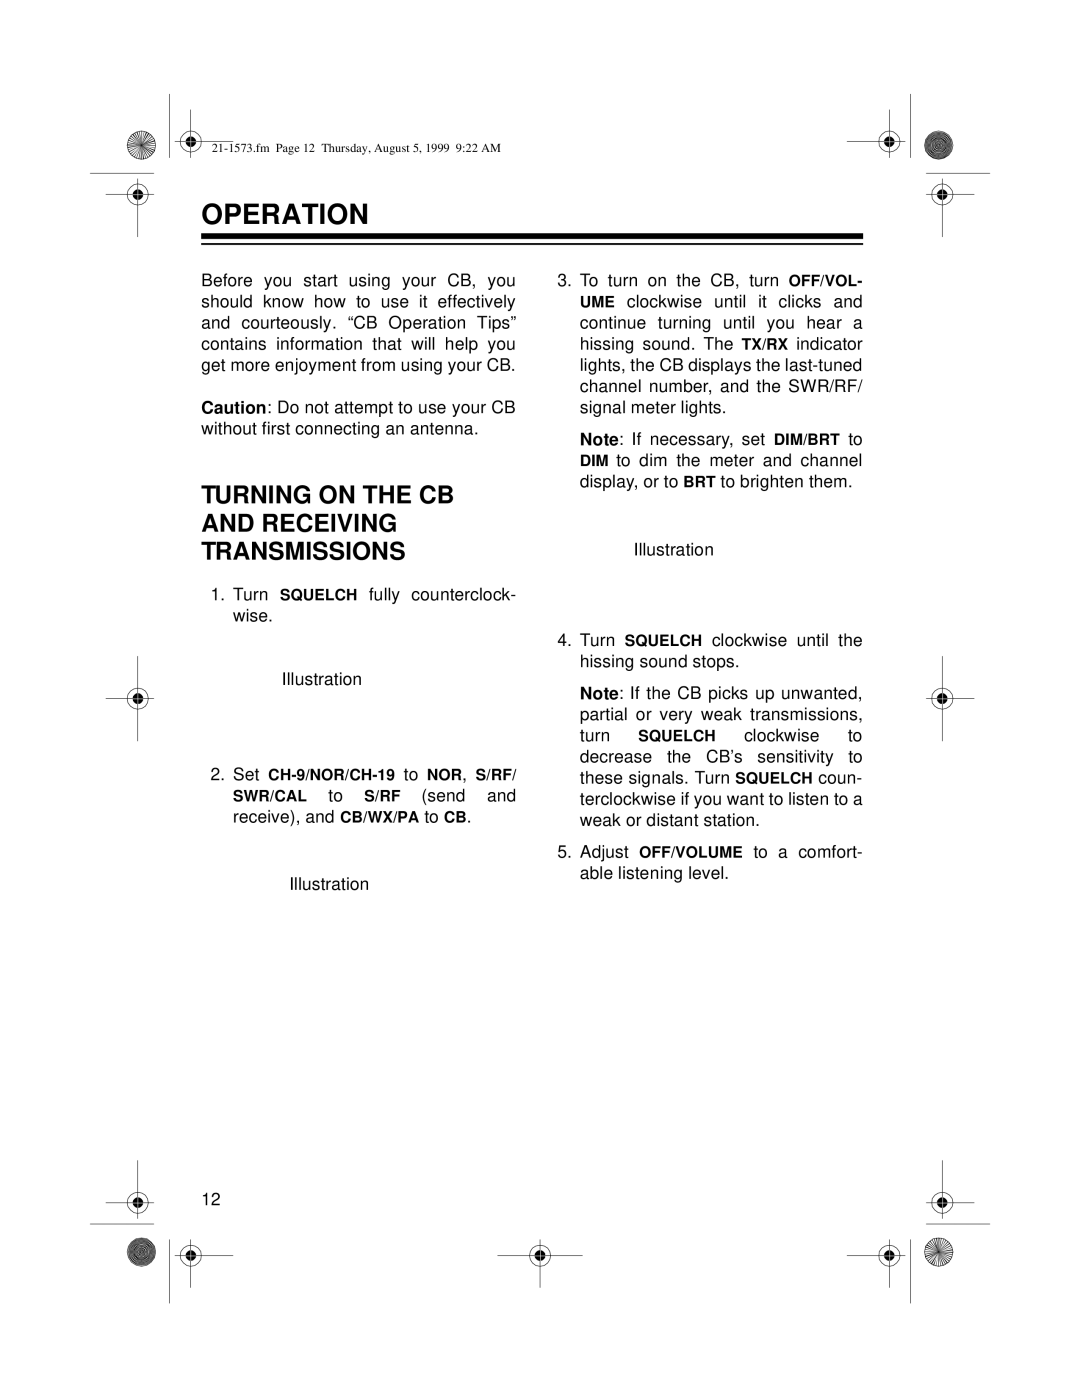 Samsung TRC-445 owner manual Operation, Turning On The Cb And Receiving Transmissions 